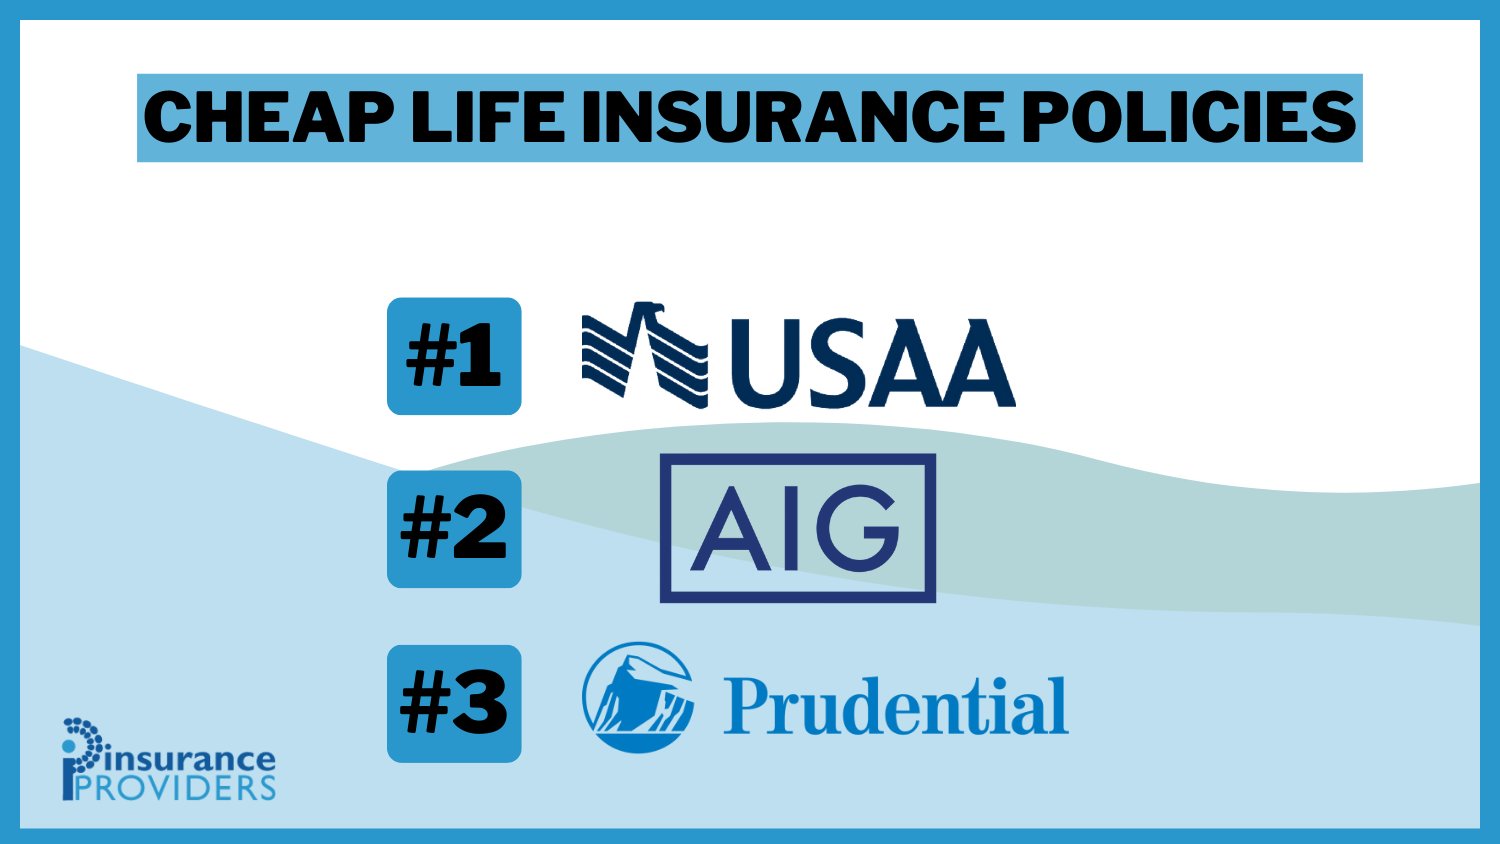 Cheap Life Insurance Policies: USAA, AIG, and Prudential